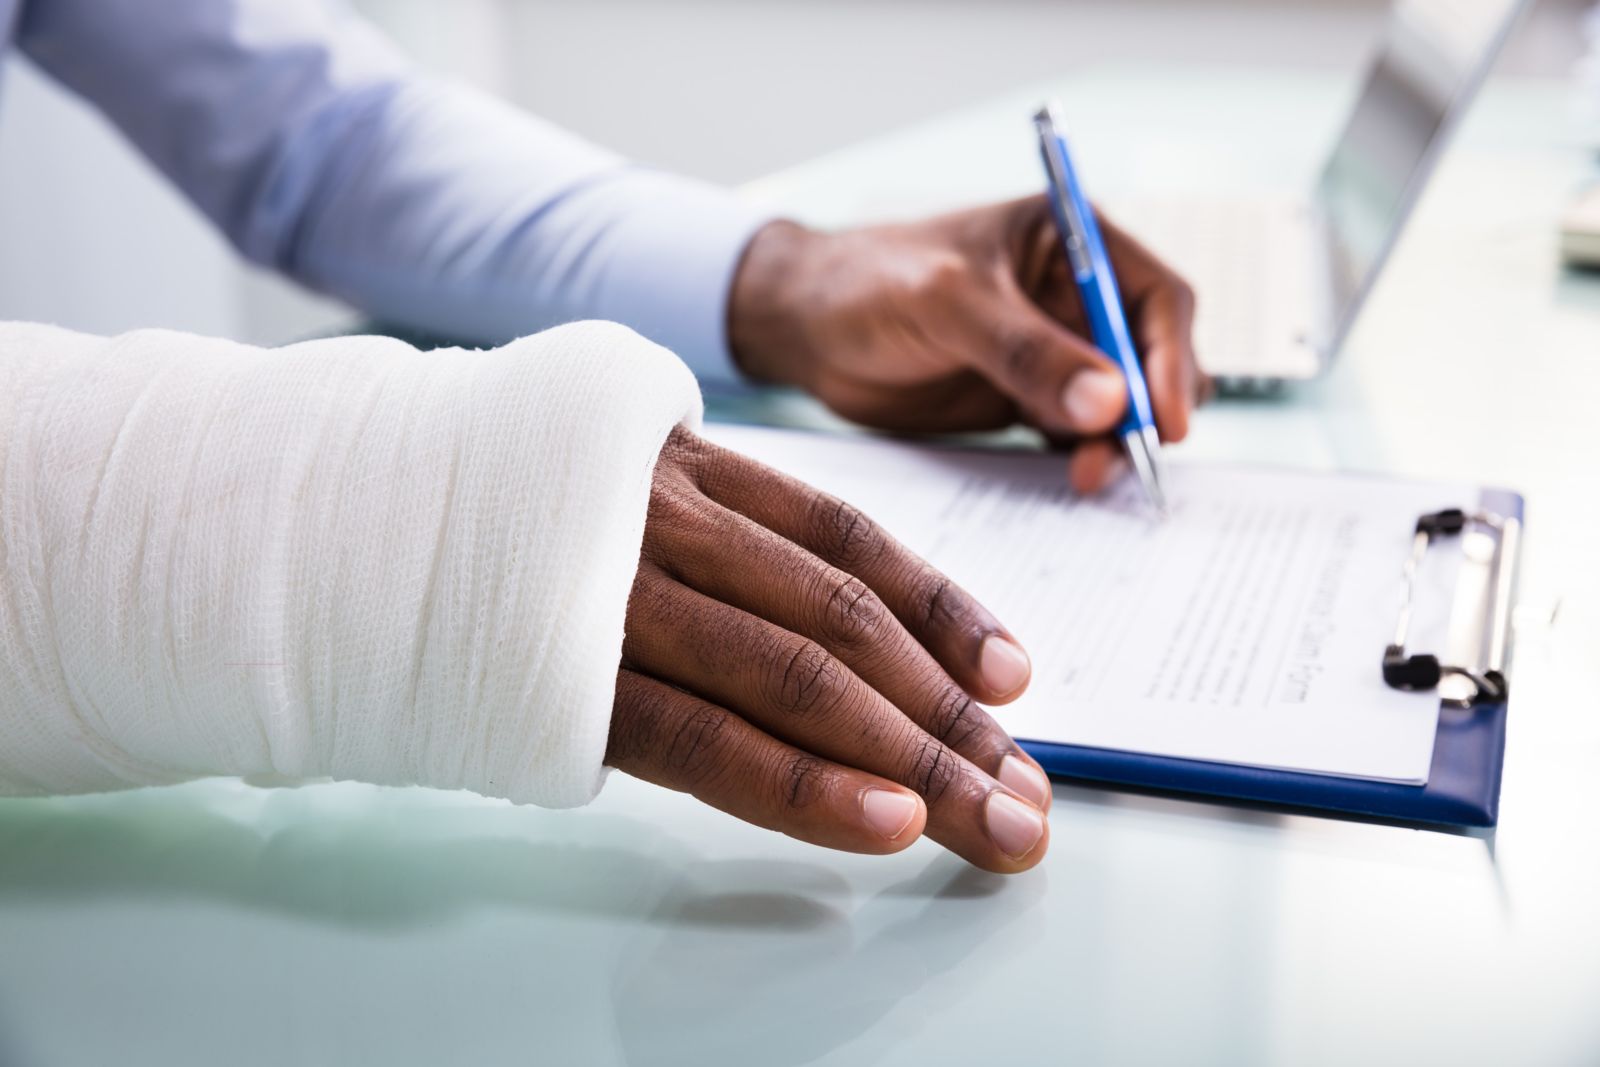 5 Common Mistakes Personal Injury Clients Make | The Law Office of Matthew  Konecky, P.A.